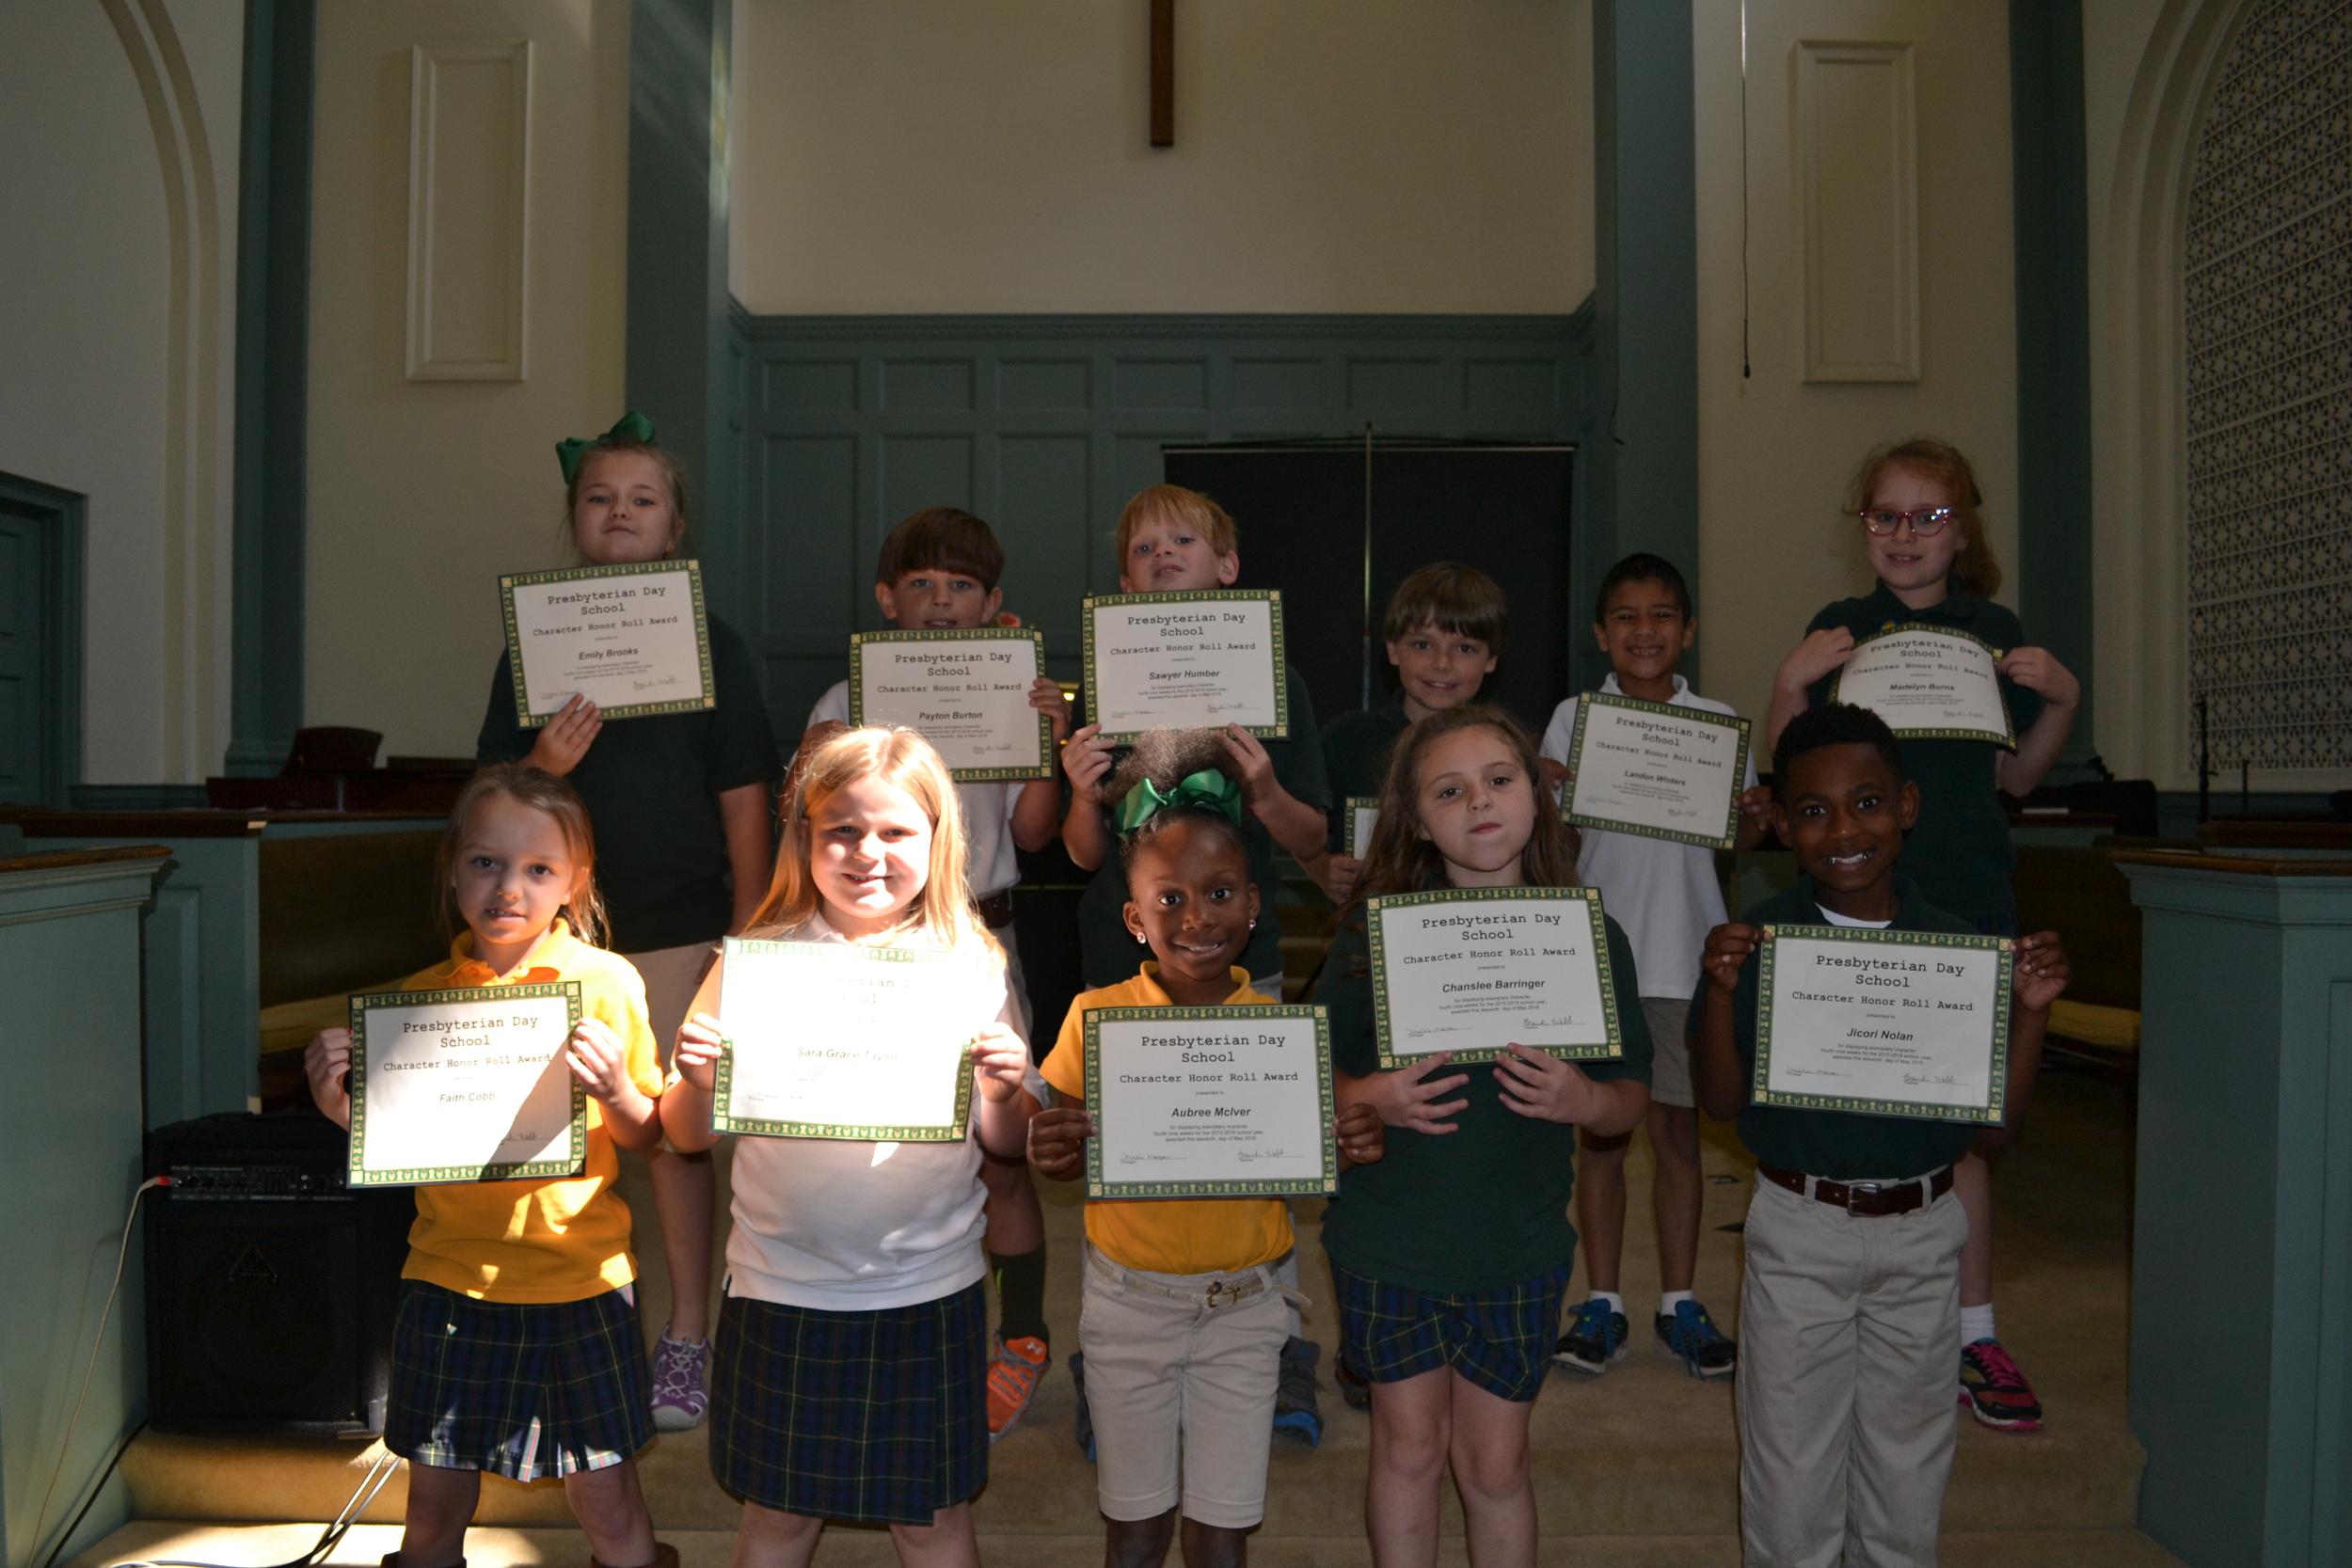 2nd grade character honor roll